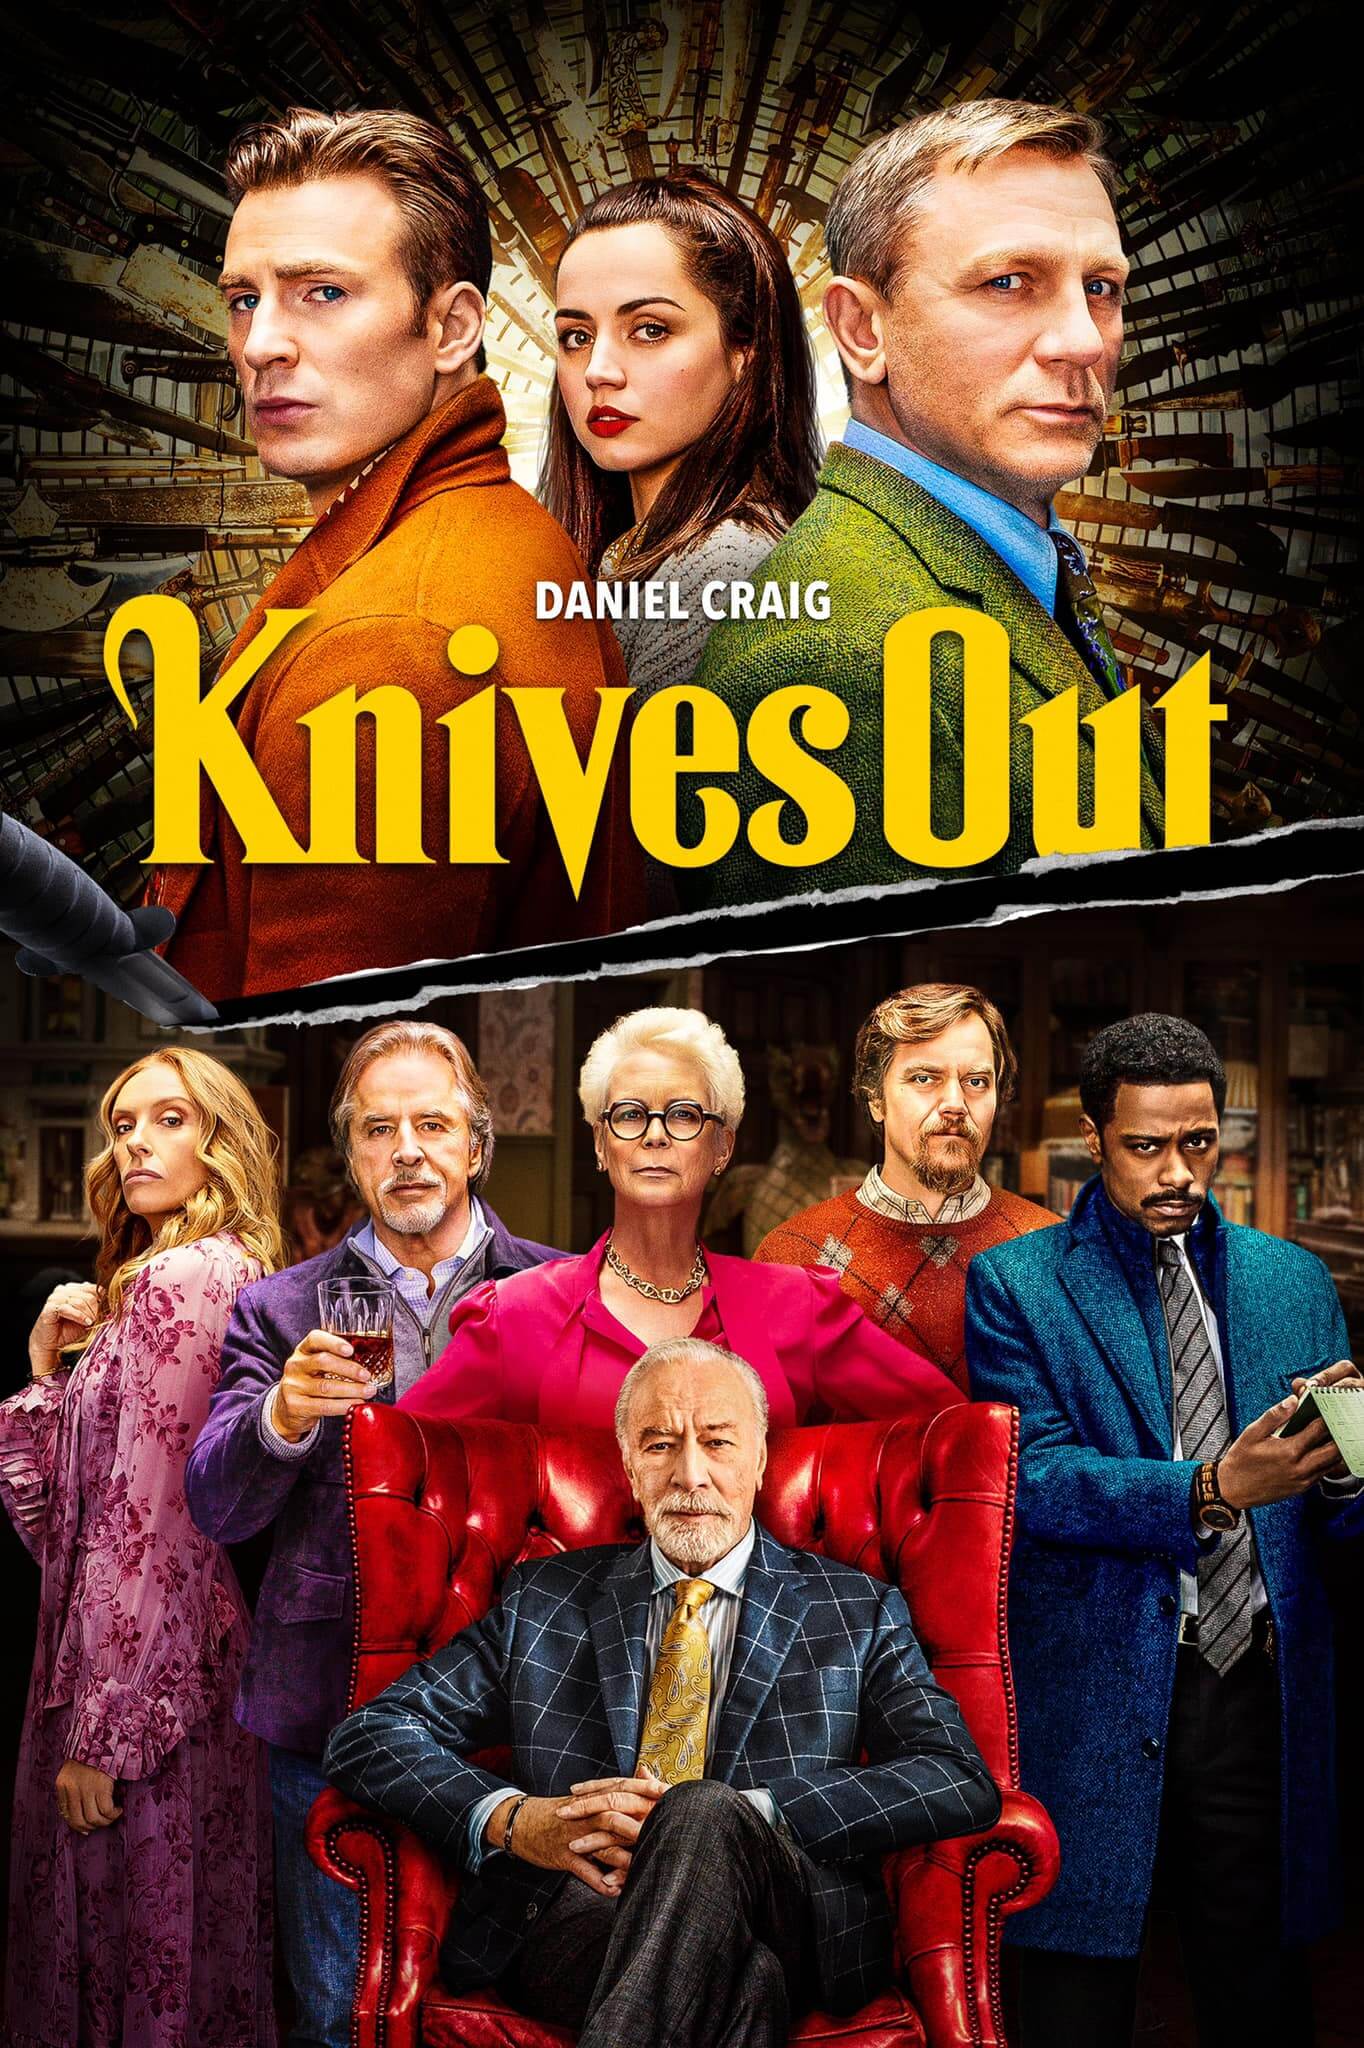 movie review on knives out